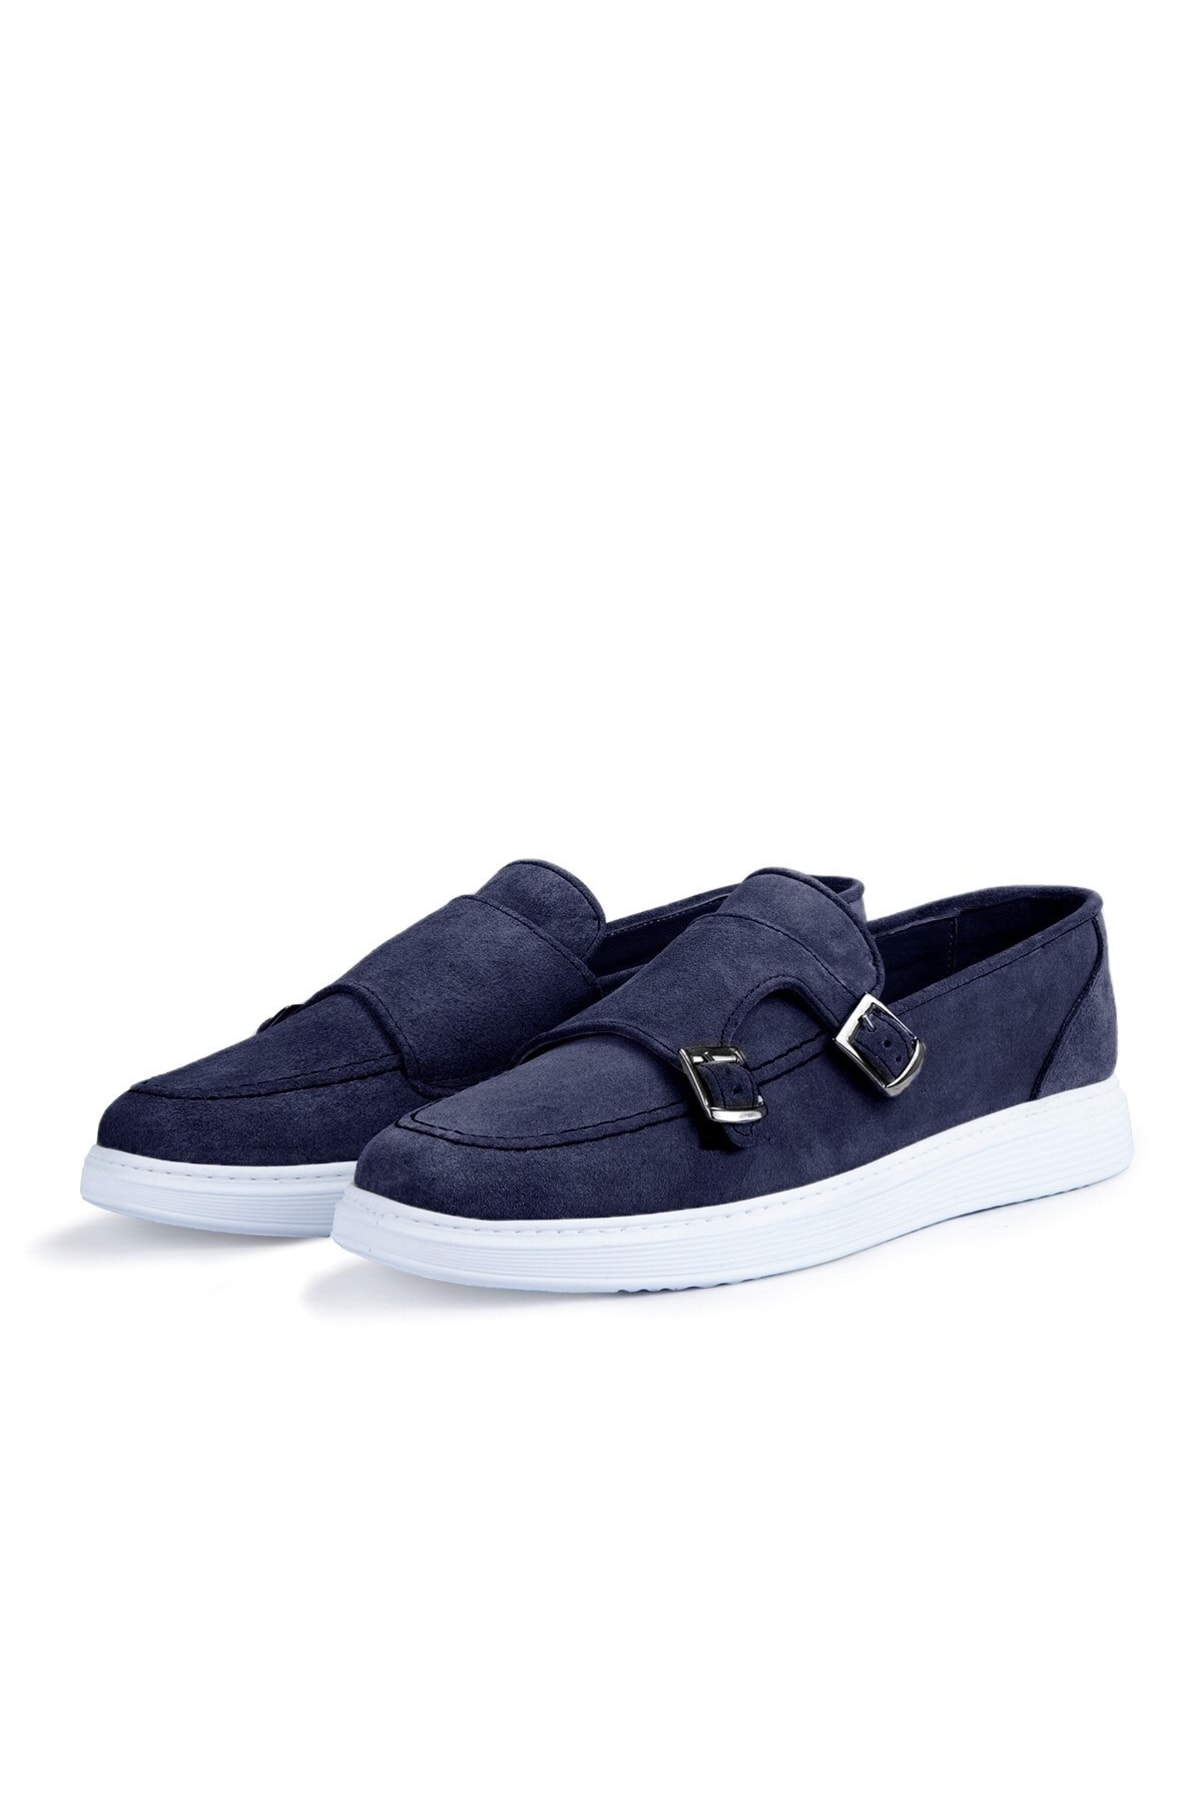 Levně Ducavelli Airy Genuine Leather & Suede Men's Casual Shoes, Suede Loafers, Summer Shoes Navy Blue.